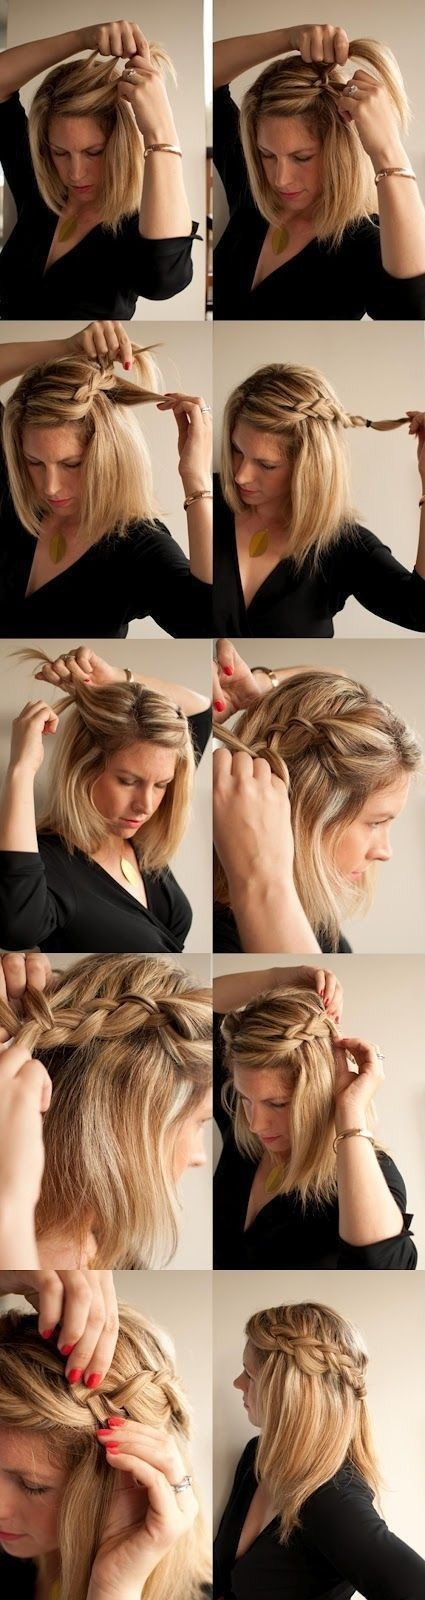 Easy Hairstyles At Home
 Easy to do at home hairstyles